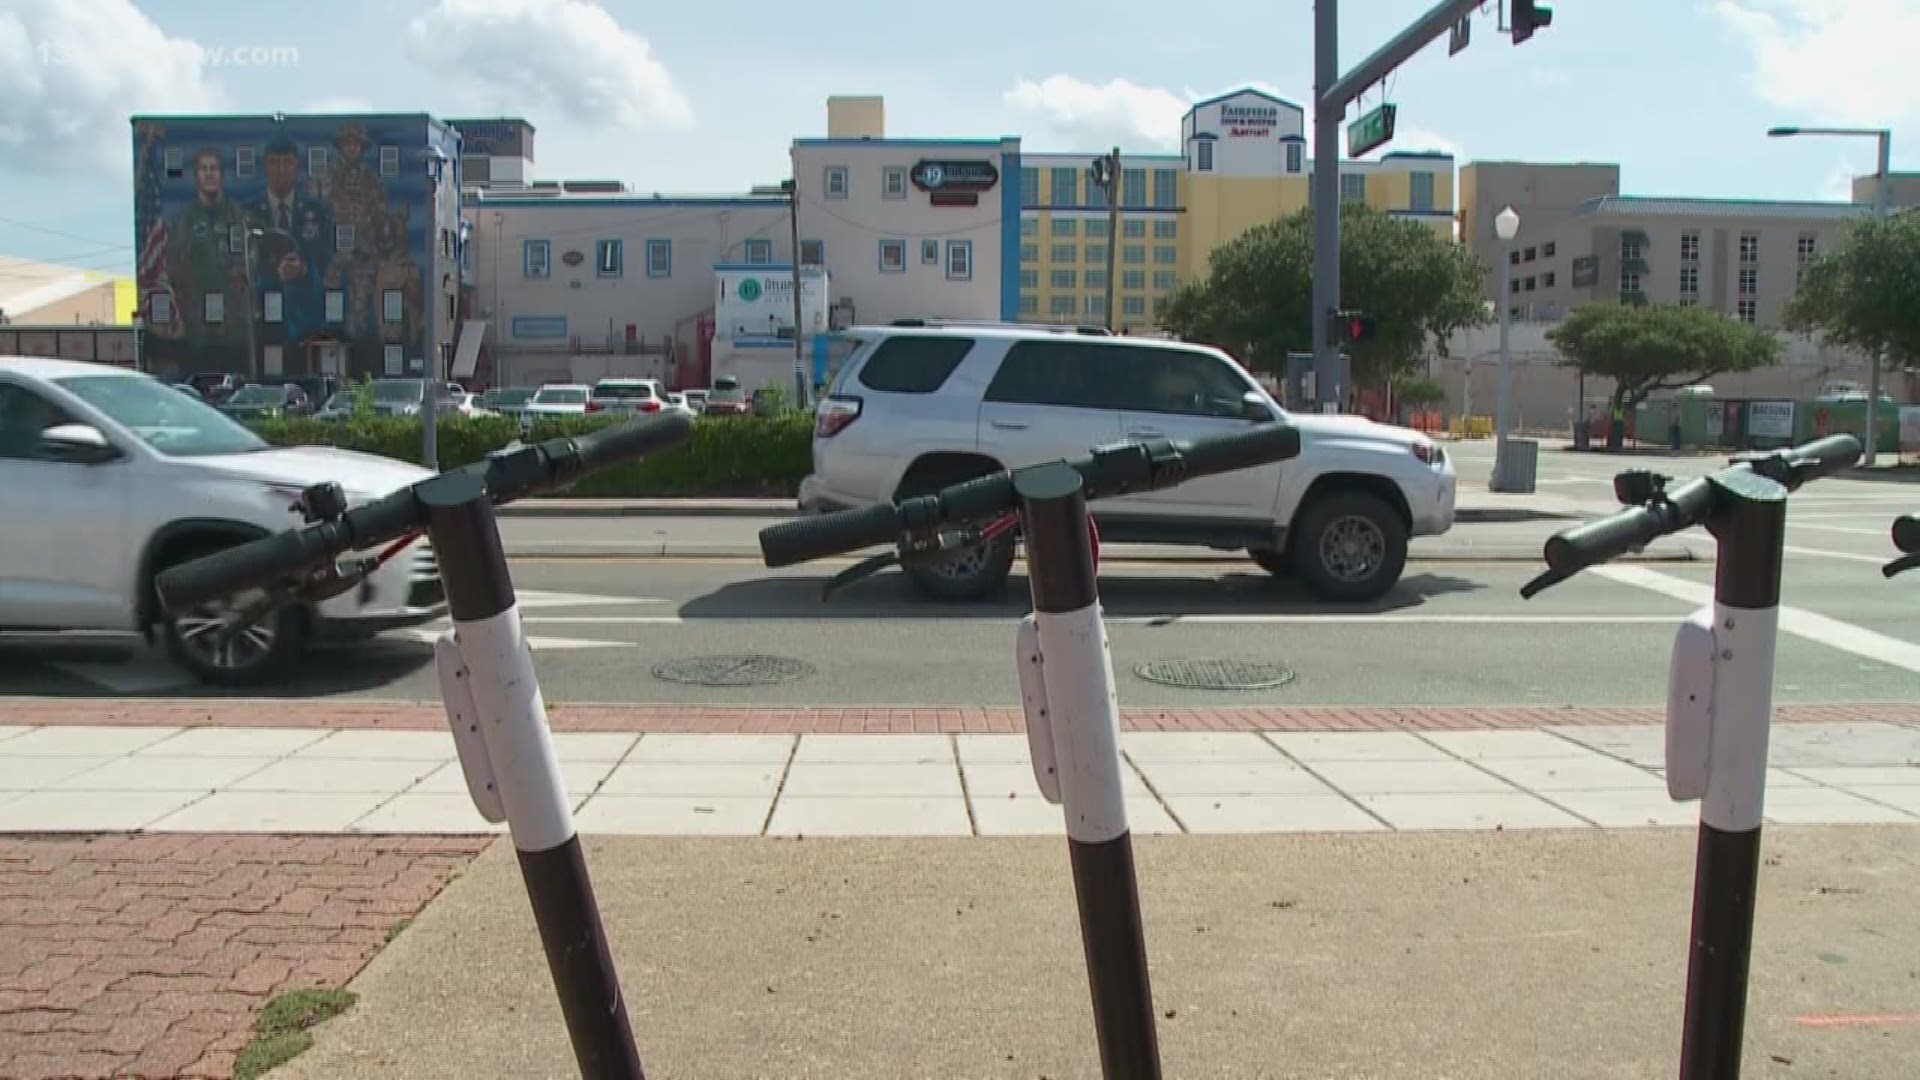 The ban comes amid safety concerns. The goal is to have the scooters removed by 5 p.m. on Friday, August 23. The ban only covers the Oceanfront area of Virginia Beach.